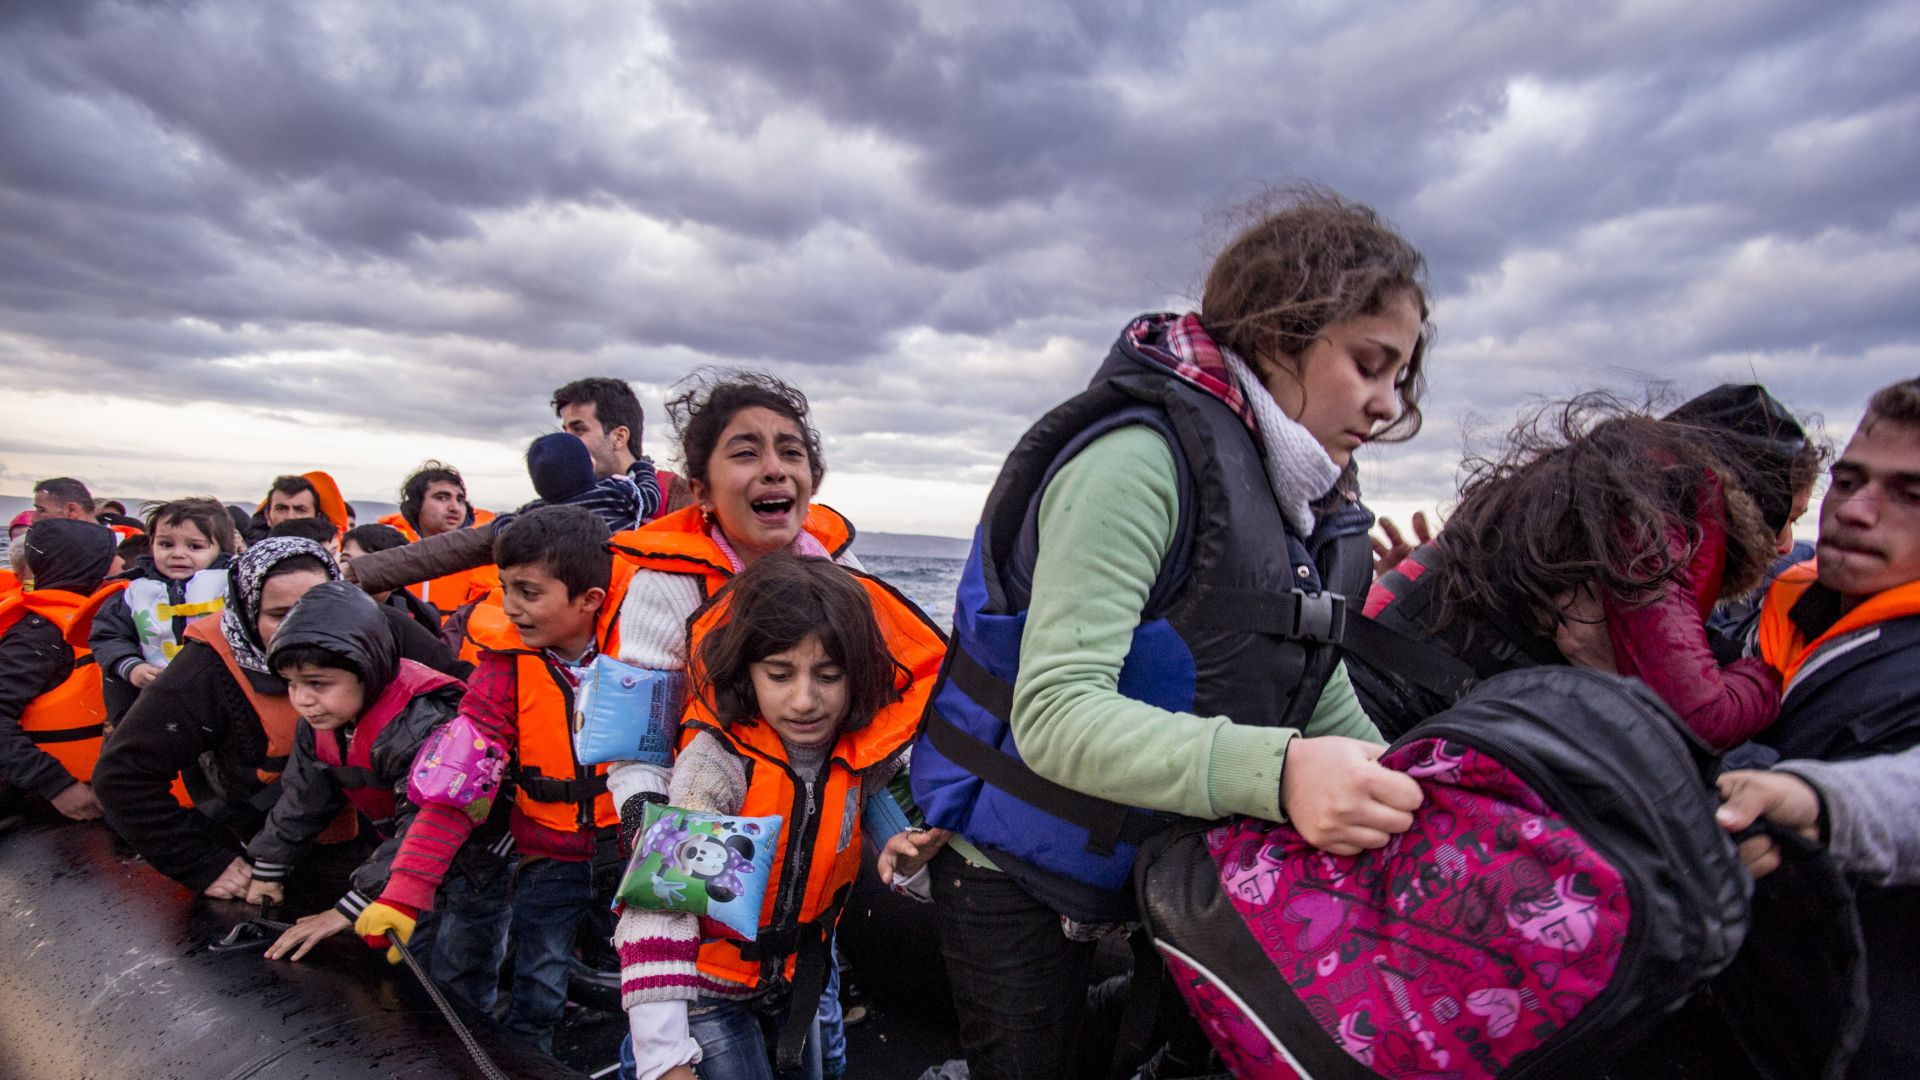 Syrian refugees, with women and children, are helped from a small inflatable boat on arrival in Lesvos